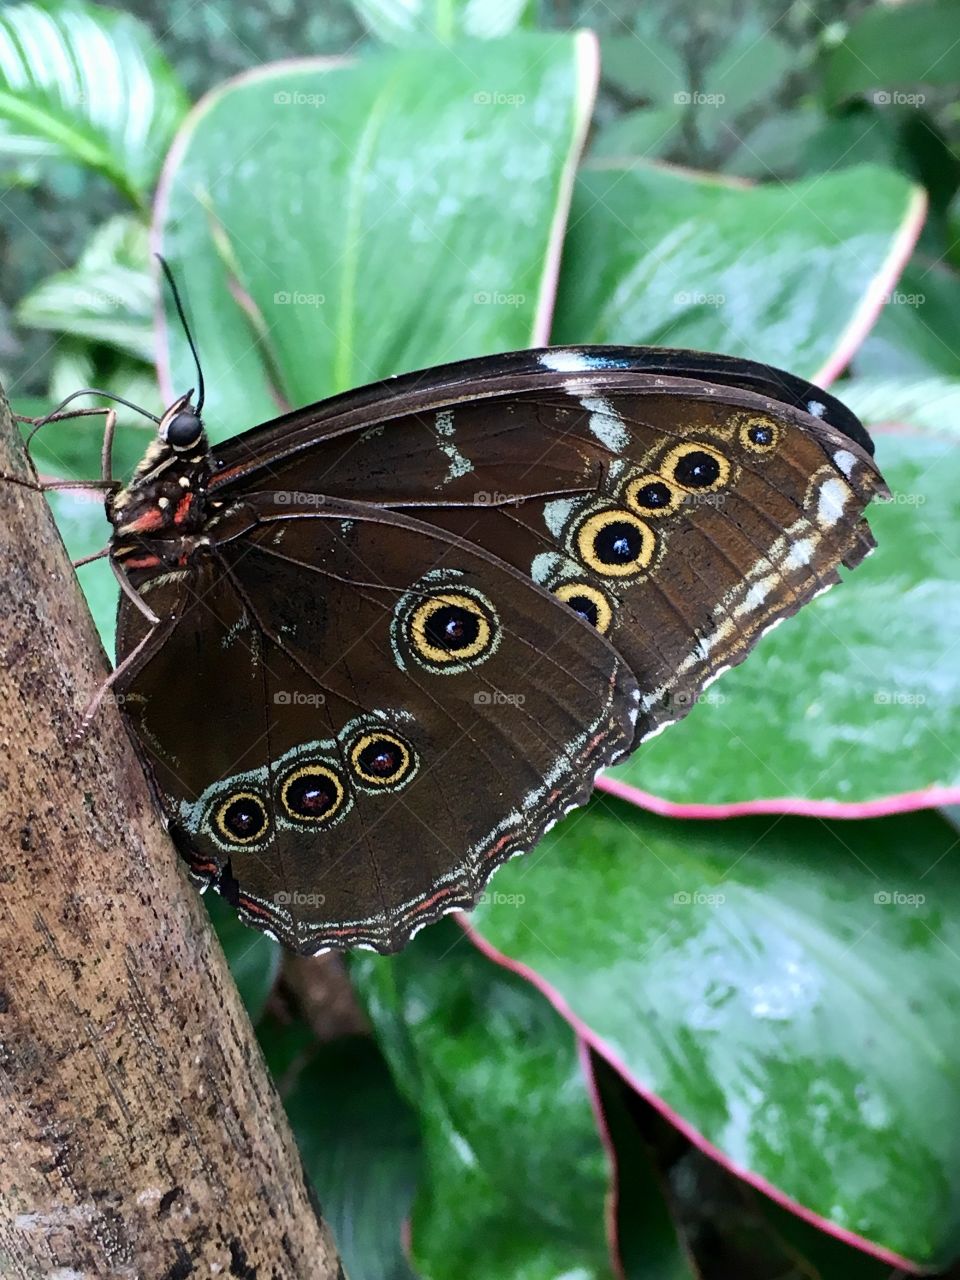 Son of nature, Morpho butterfly